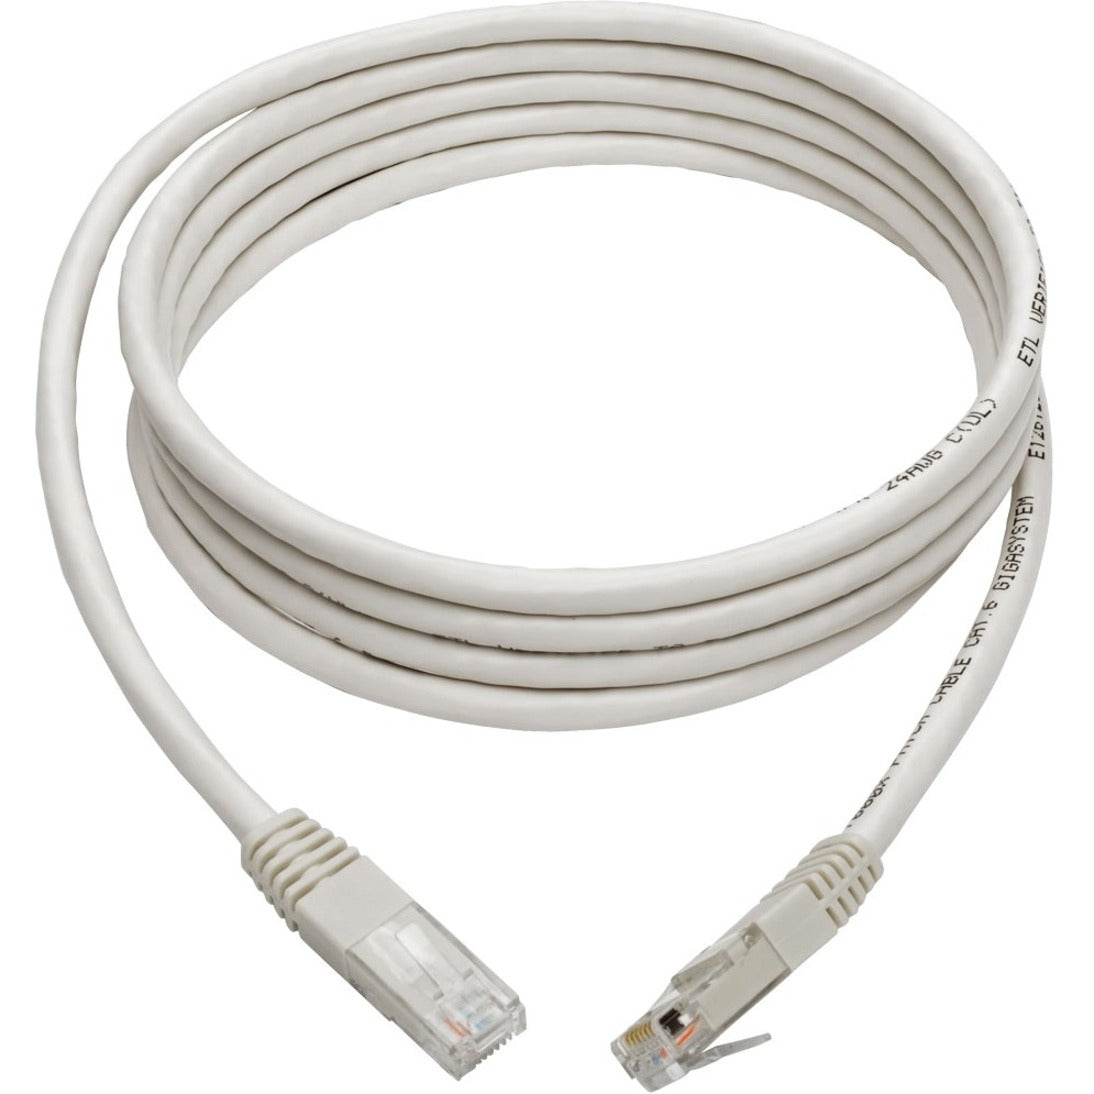 Tripp Lite N200-007-WH Cat6 Gigabit Molded Patch Cable (RJ45 M/M), White, 7 ft, Strain Relief, Stranded, Molded